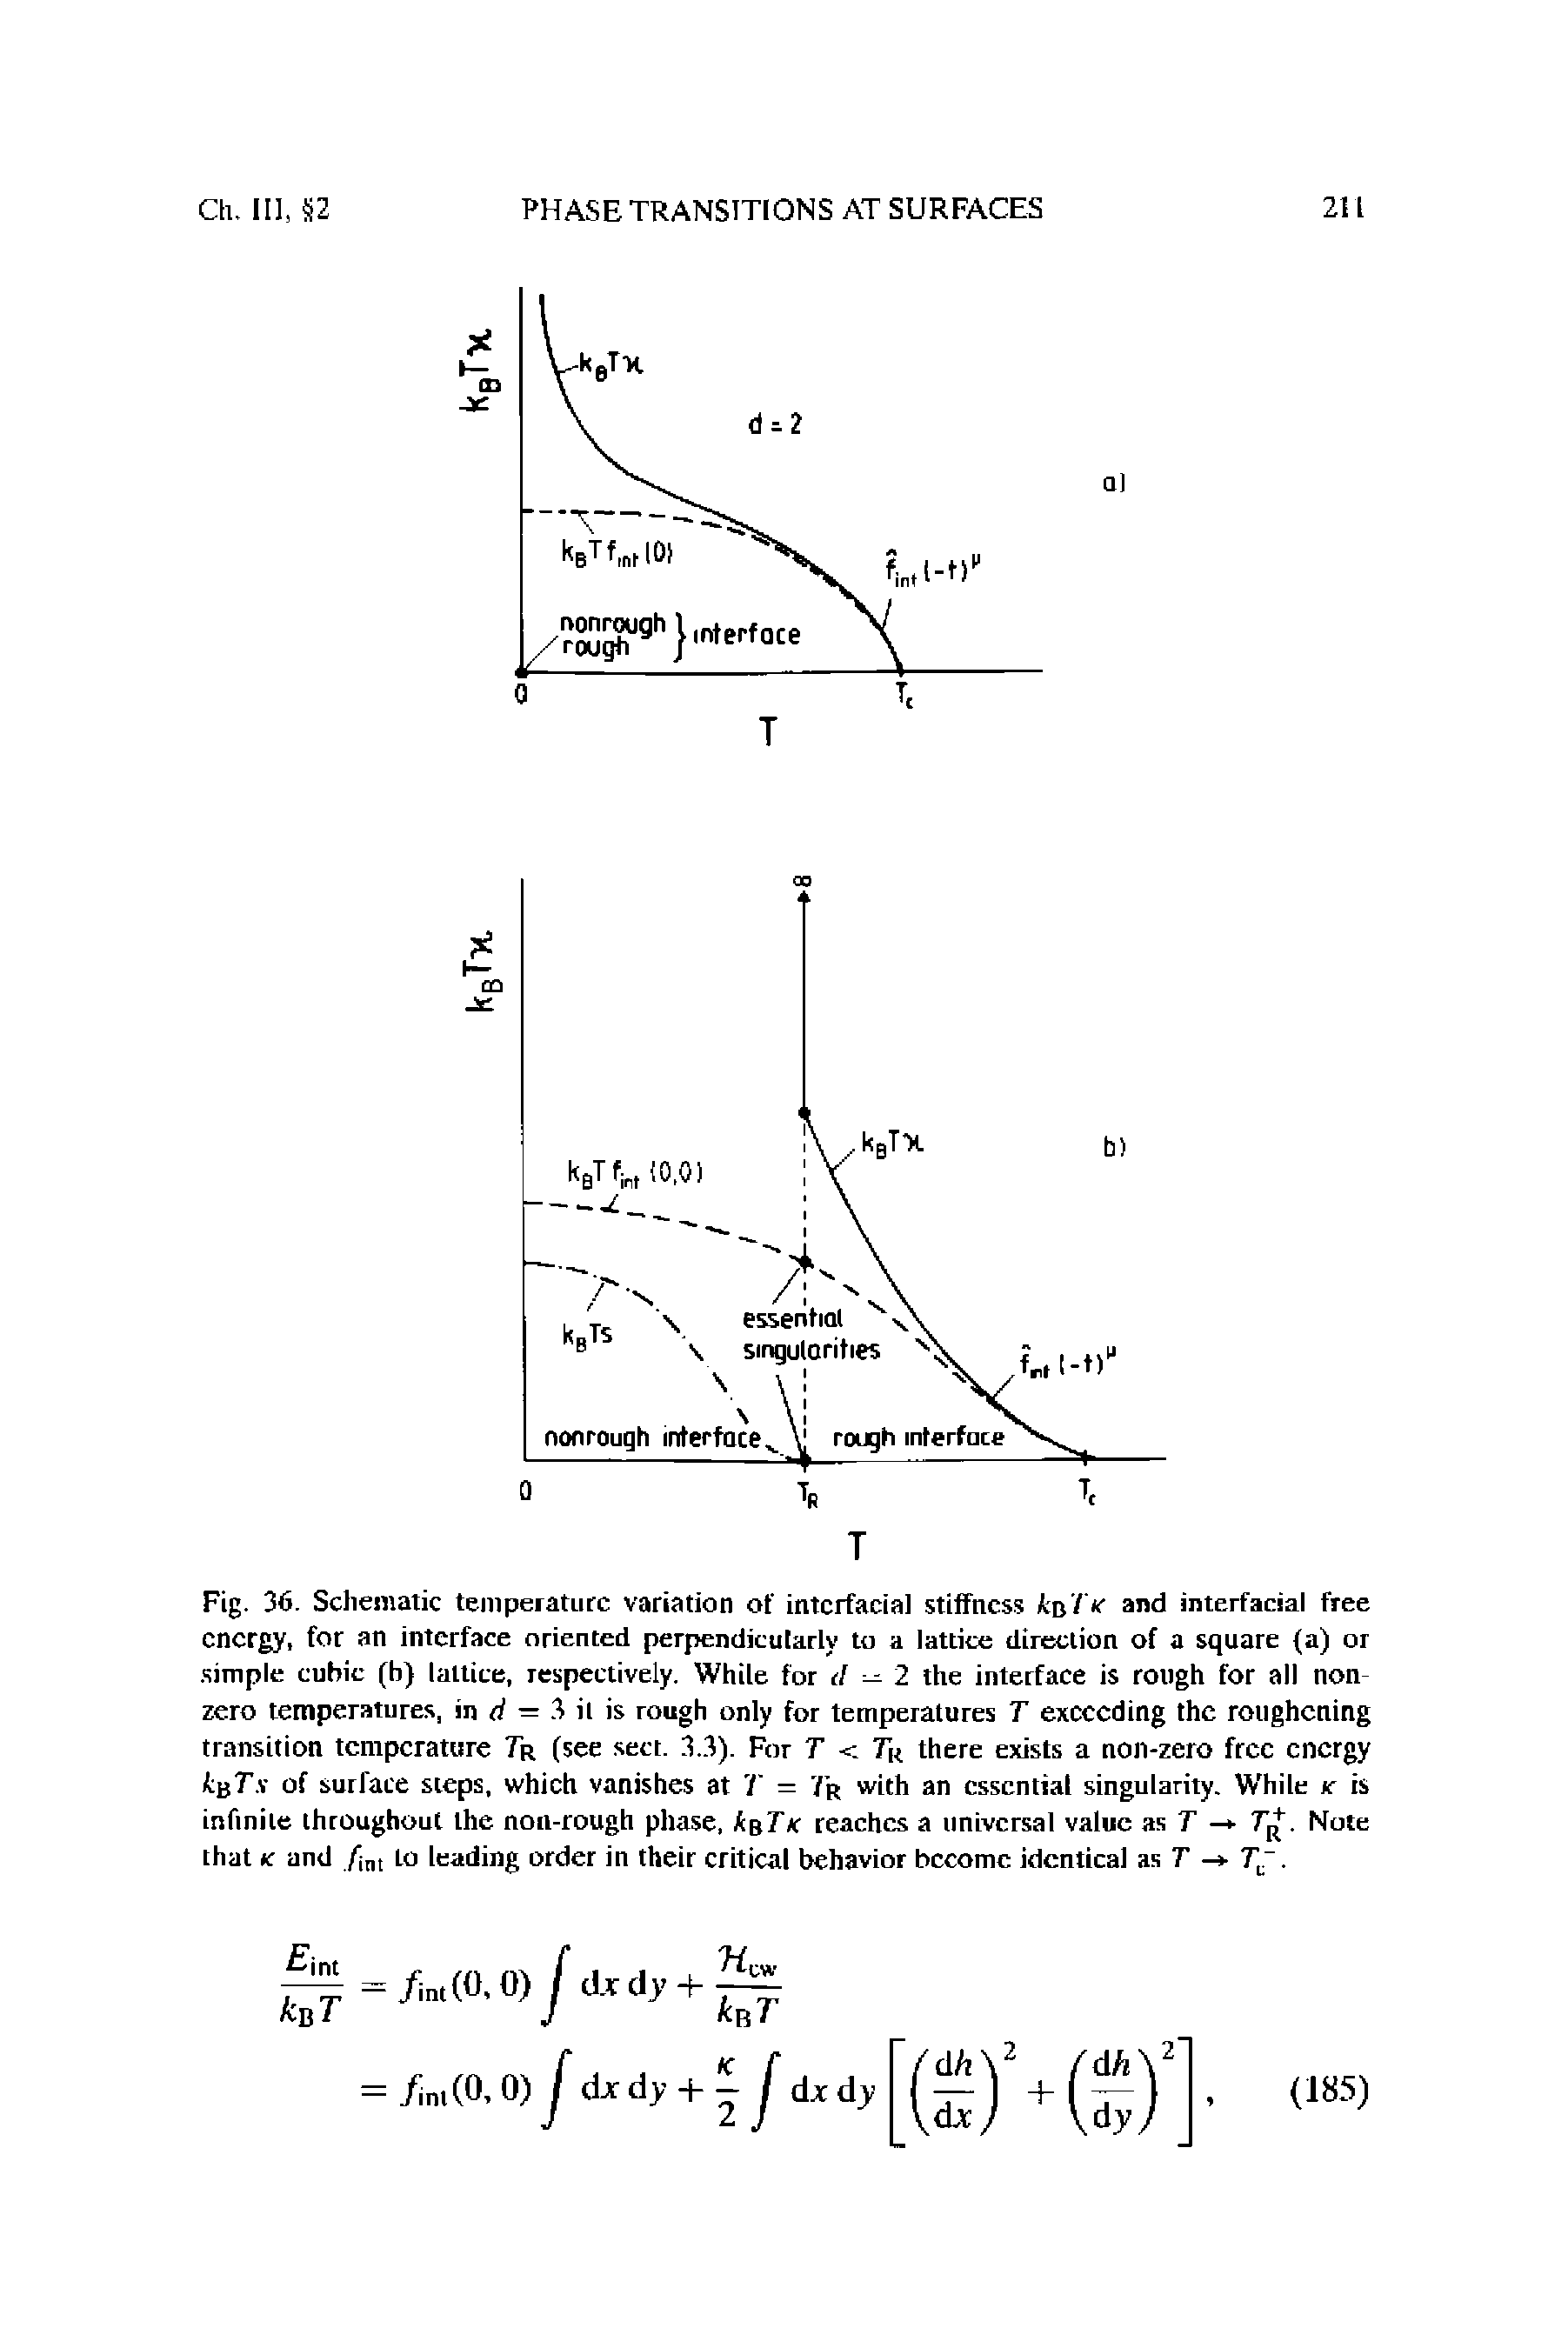 Fig. 36. Schematic temperature variation of intcrfacial stiffness kn I K and interfacial free energy, for an interface oriented perpendicularly to a lattice direction of a square a) or simple cubic (b) lattice, respectively. While for tl — 2 the interface is rough for all non zero temperatures, in d — 3 il is rough only for temperatures T exceeding the roughening transition temperature 7r (see sect. 3.3). For T < 7U there exists a non-zero free energy tigT.v of surface steps, which vanishes at T = 7 r with an essential singularity. While k is infinite throughout the noil-rough phase, k Tic reaches a universal value as T - T . Note that k and fml to leading order in their critical behavior become identical as T - T. ...